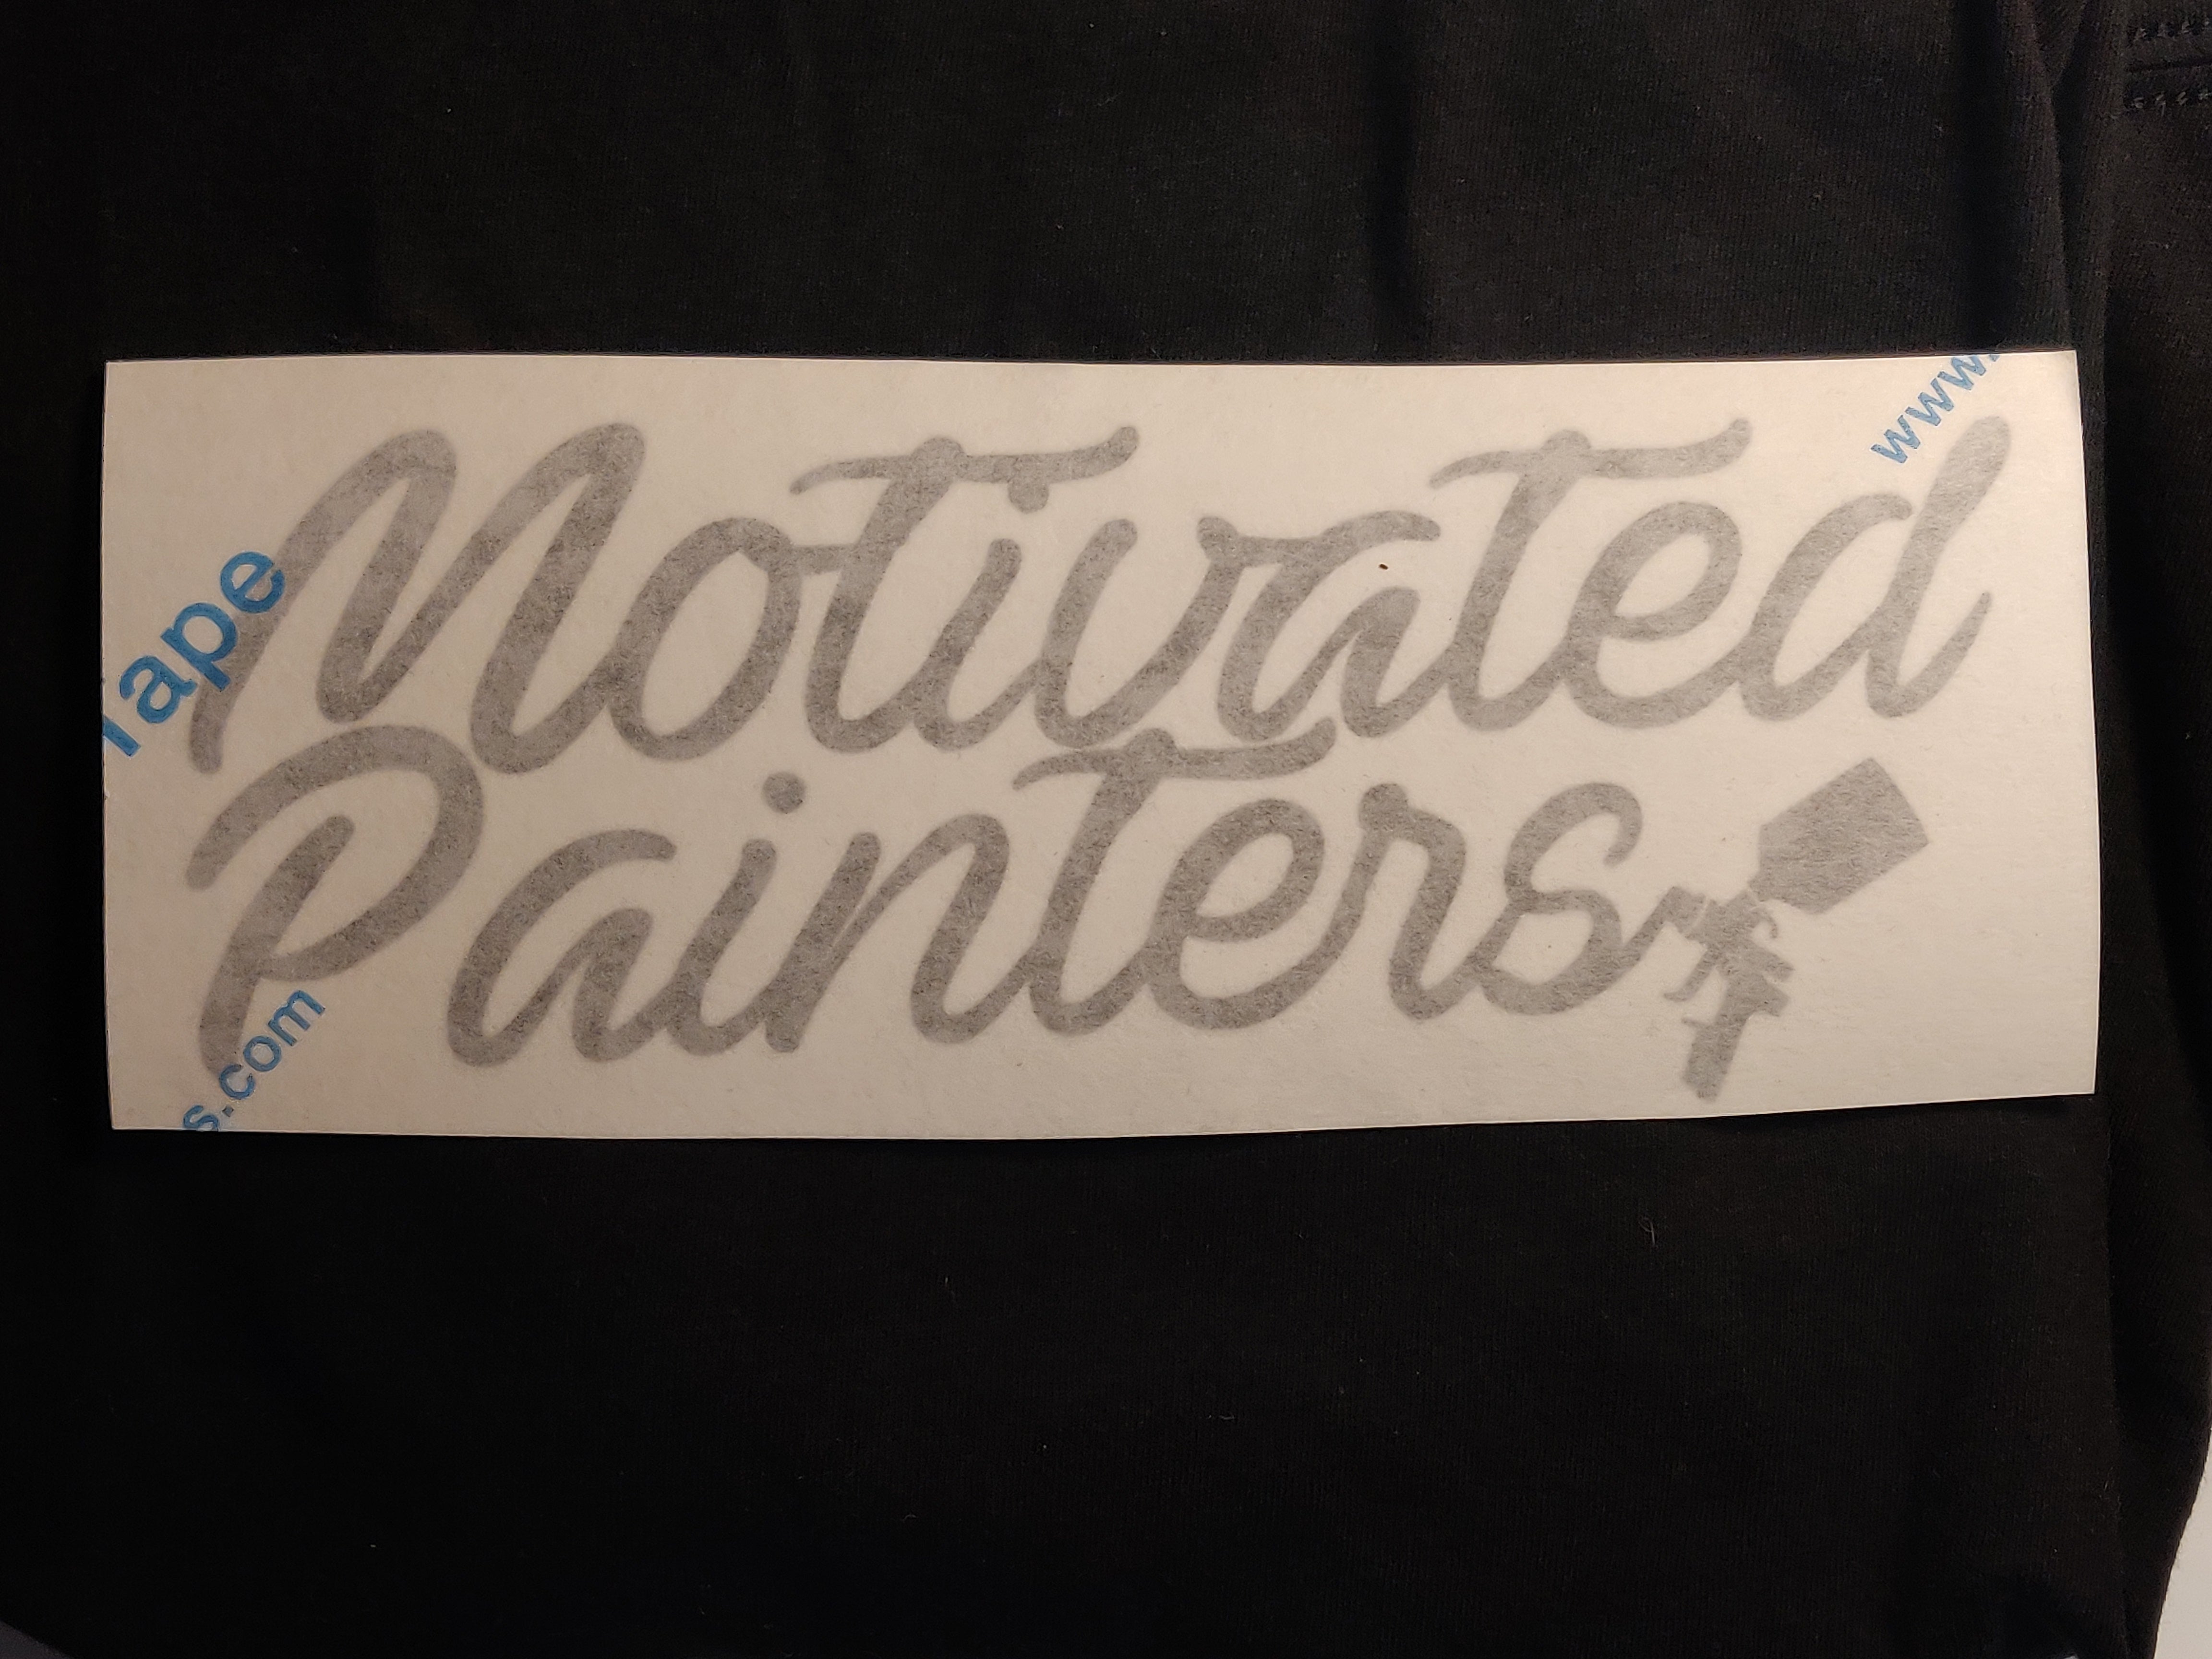 Motivated Painters decal